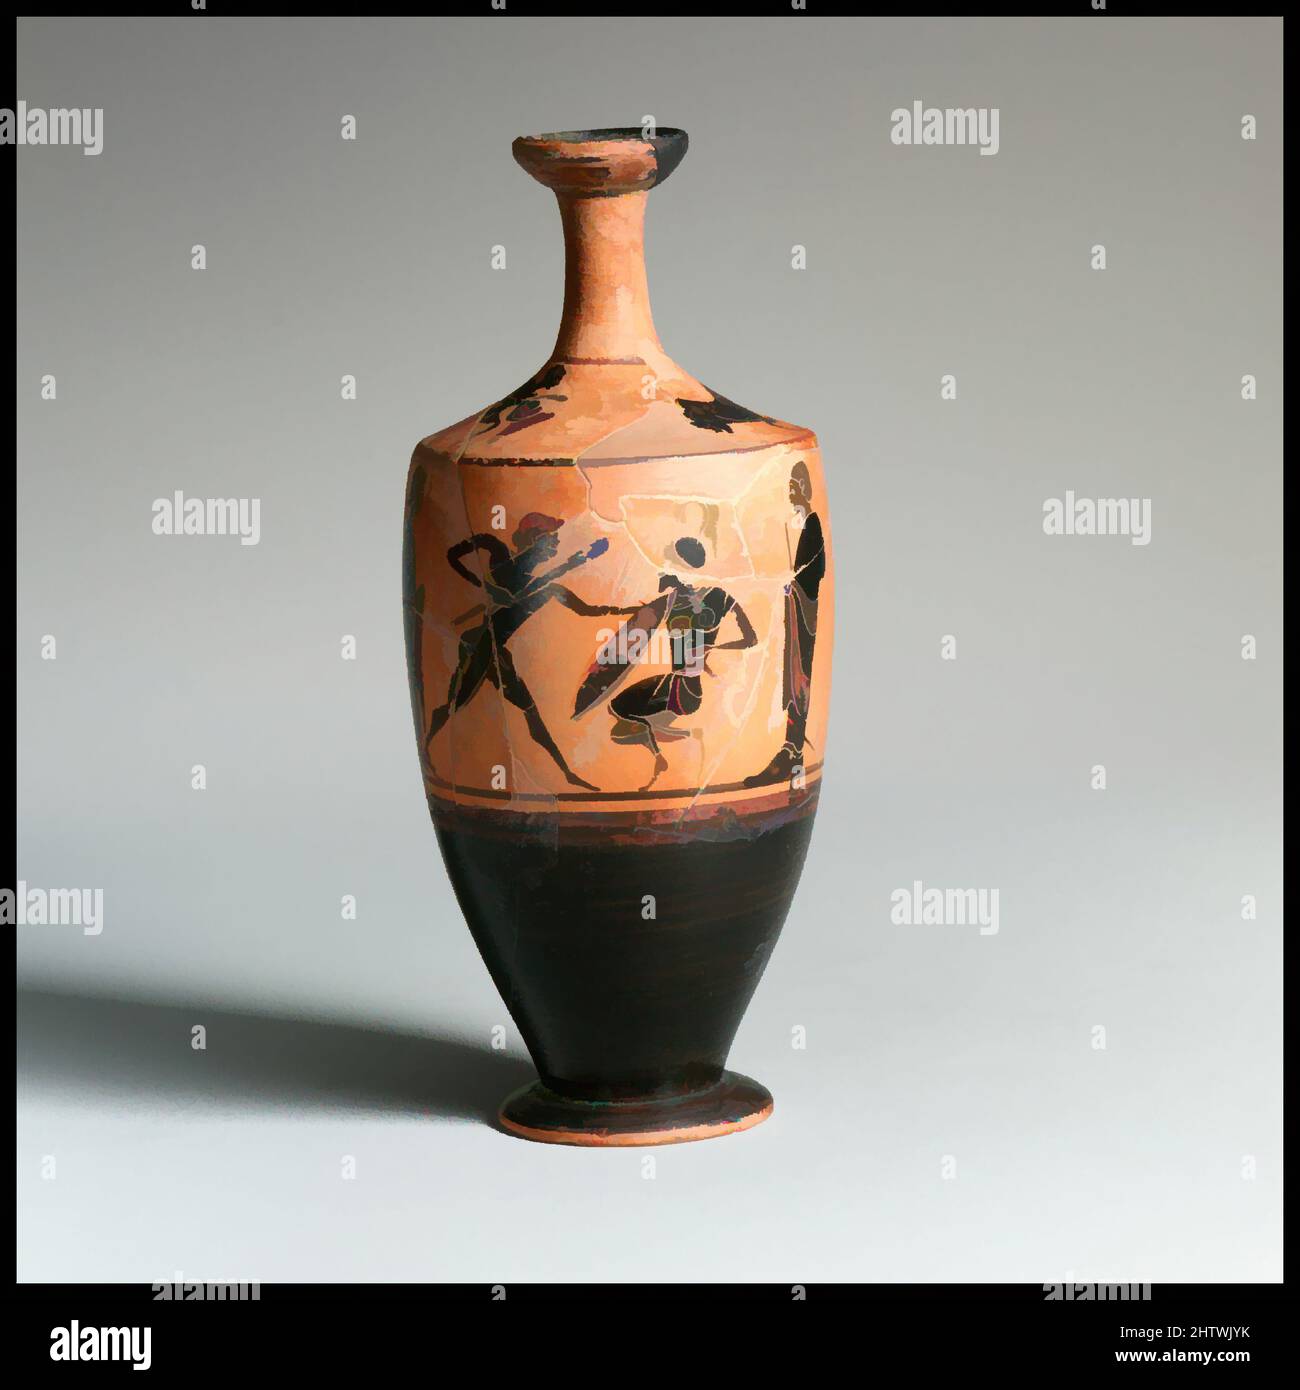 Art inspired by Terracotta lekythos (oil flask), Archaic, ca. 500 B.C., Greek, Attic, Terracotta; black-figure, H. 5 5/16 in. (13.5 cm), Vases, Herakles fighting Kyknos; on the shoulder, Herakles and the Lion, Classic works modernized by Artotop with a splash of modernity. Shapes, color and value, eye-catching visual impact on art. Emotions through freedom of artworks in a contemporary way. A timeless message pursuing a wildly creative new direction. Artists turning to the digital medium and creating the Artotop NFT Stock Photo